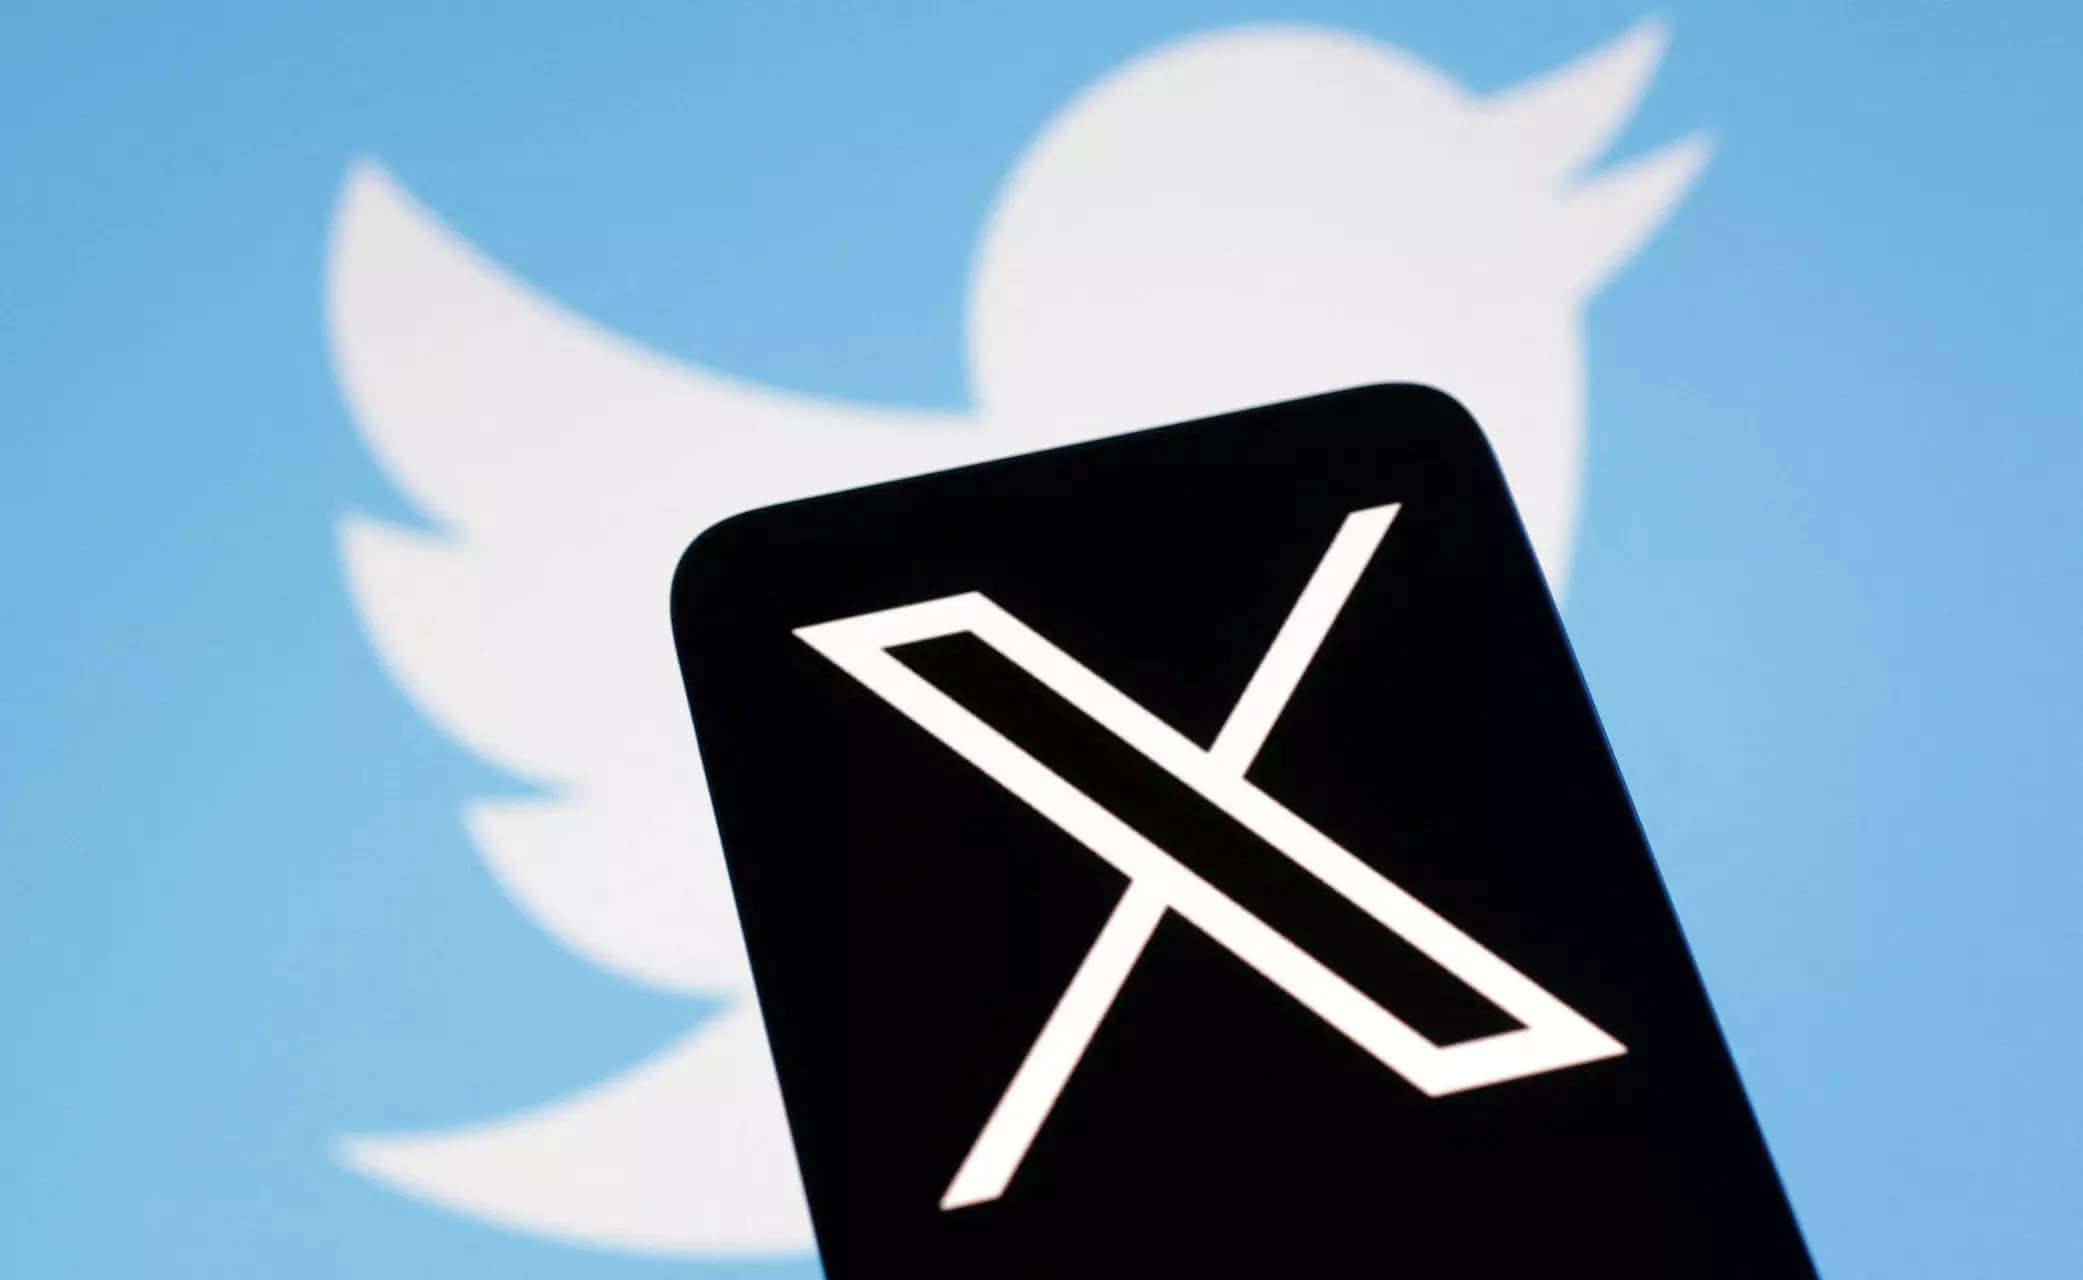 X social media looking to build a trading hub inside app, Semafor reports